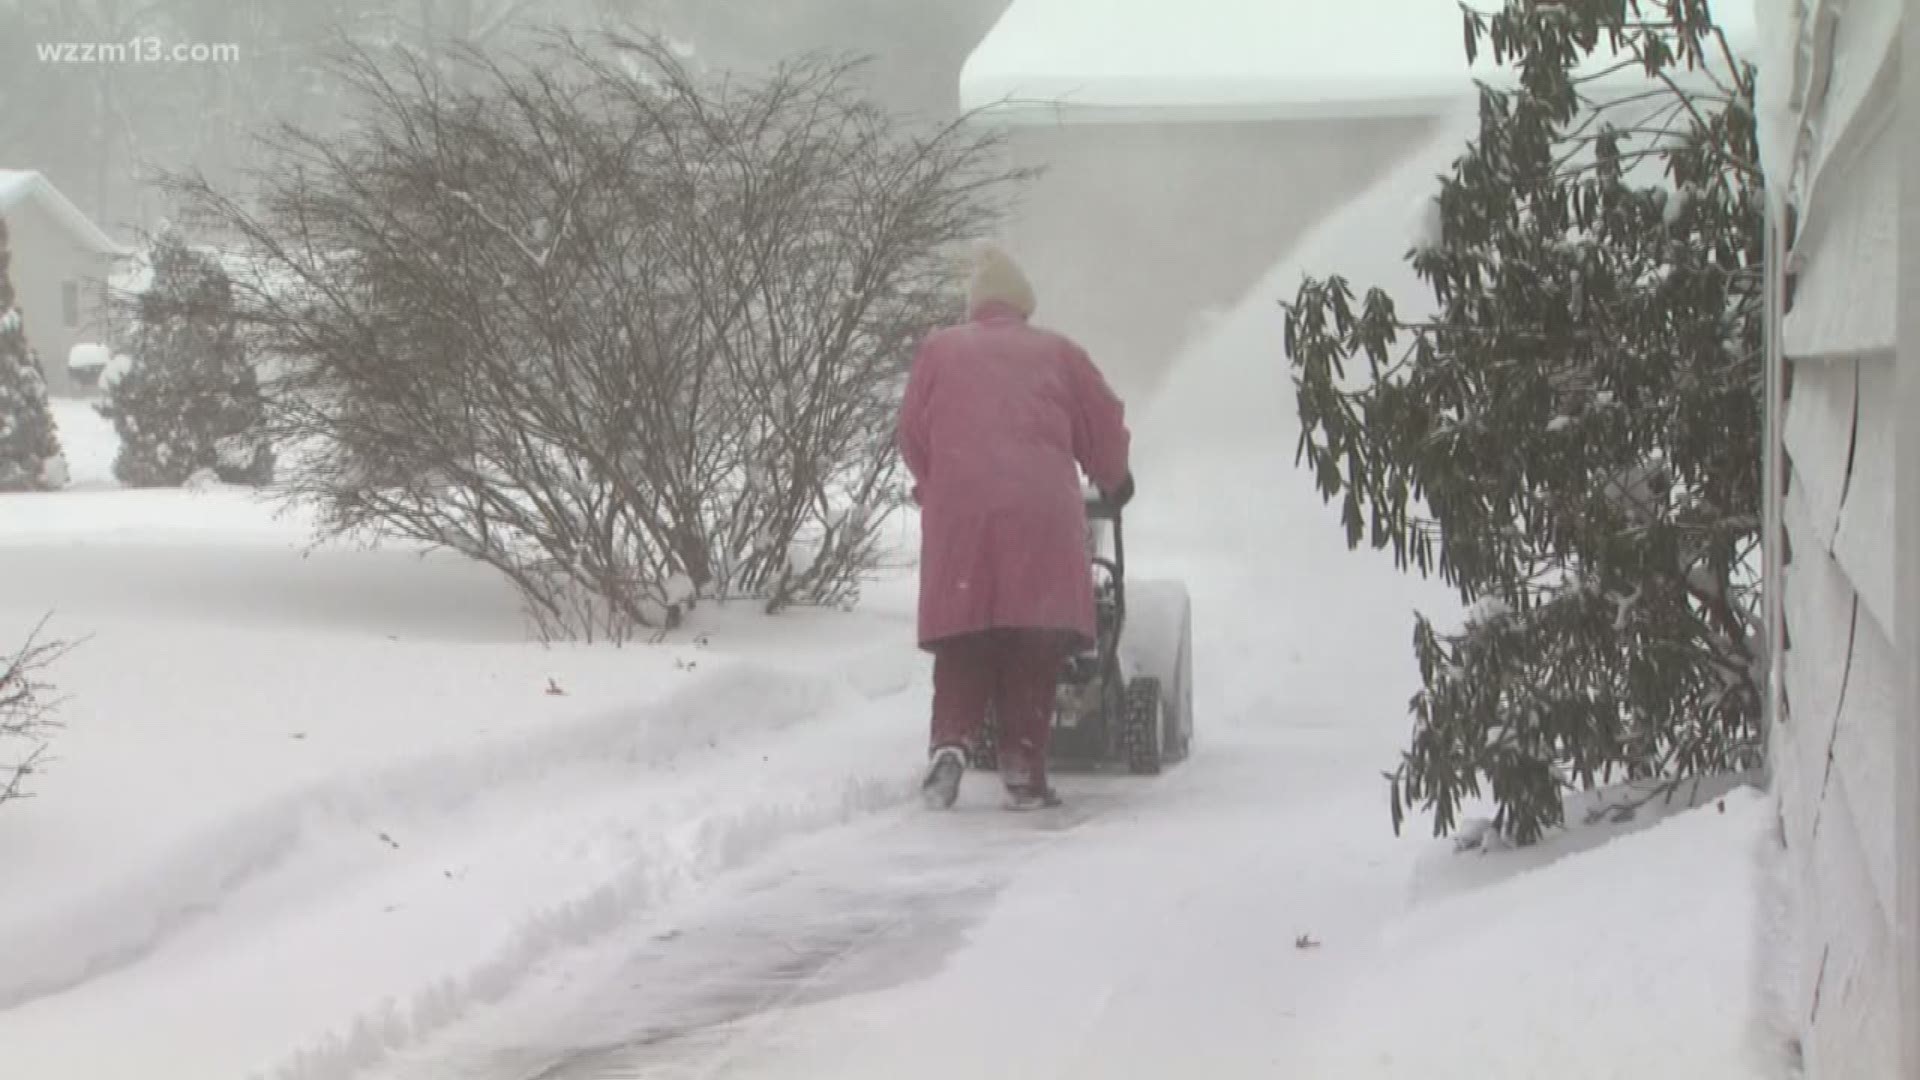 82-year-old Muskegon woman tackles cold and snow